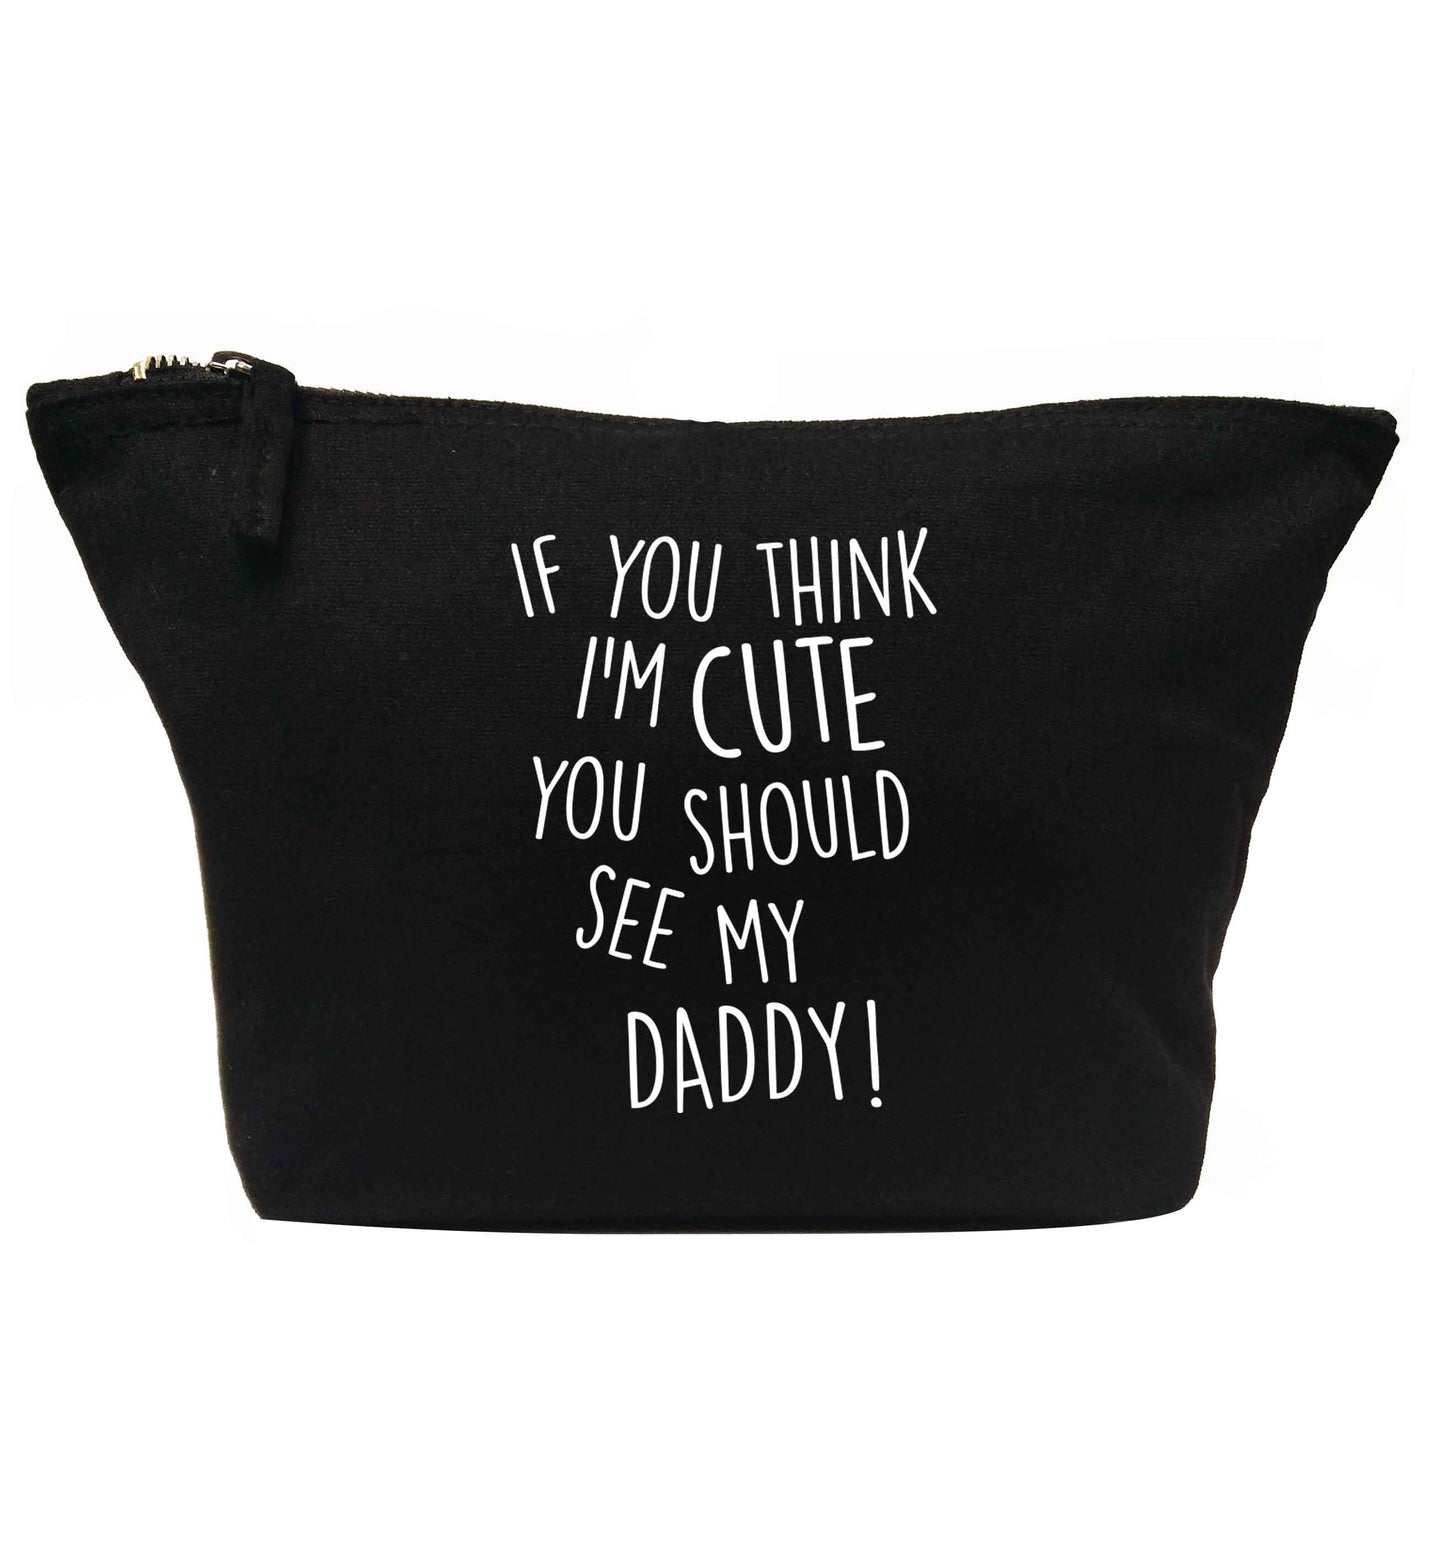 If you think I'm cute you should see my daddy | Makeup / wash bag